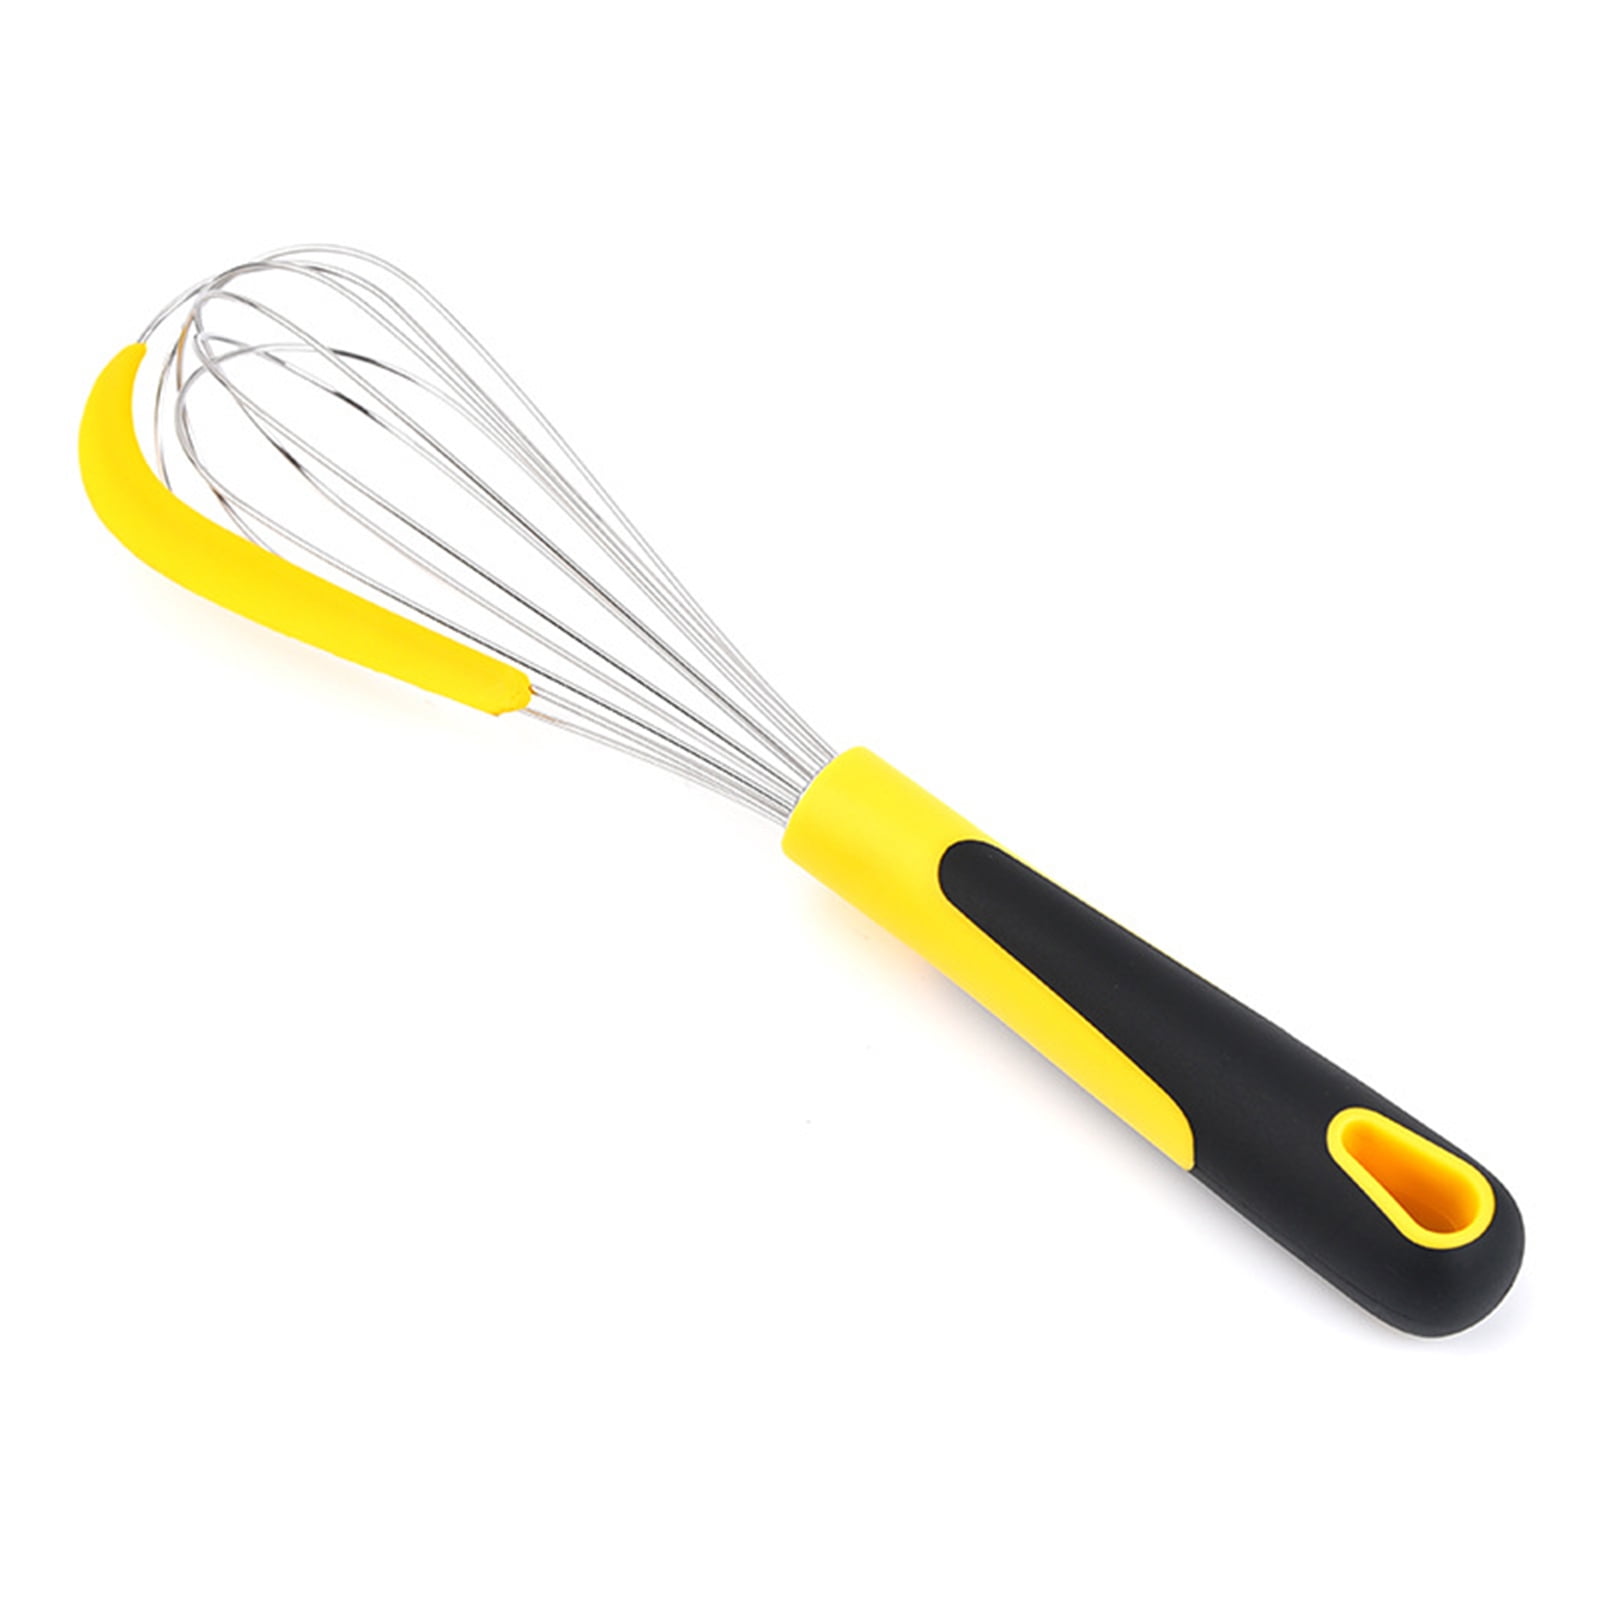 Travelwant Stainless Steel Whisks, Wire Whisk Set Wisk Kitchen Tool Kitchen Whisks Balloon Wire Whisk for Cooking, Blending, Whisking, Beating